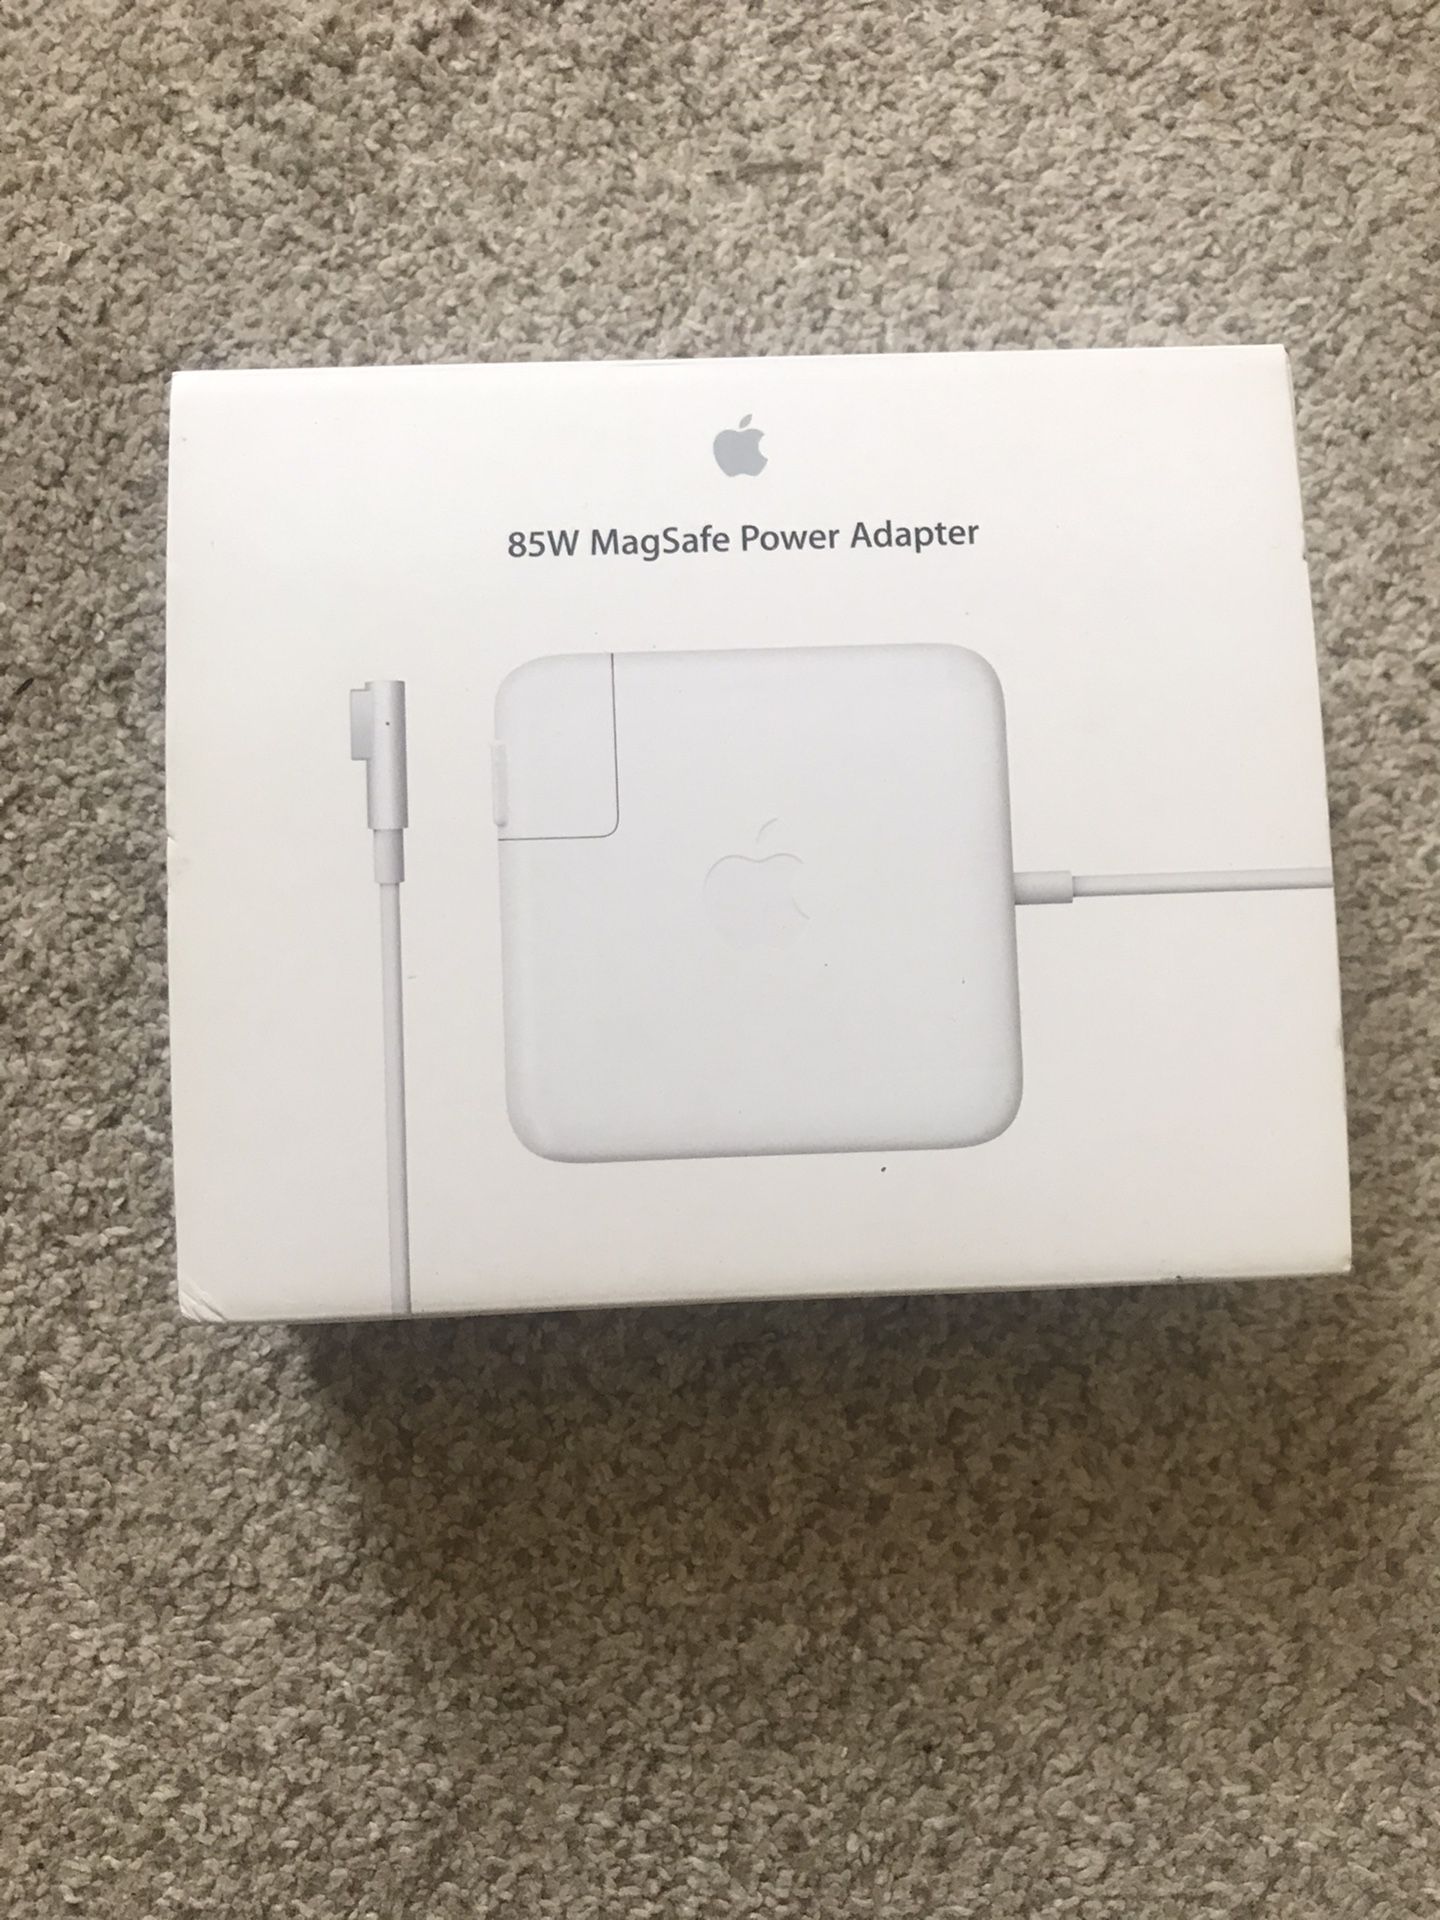 Macbook Pro Charger - 85W MagSafe Power Adapter